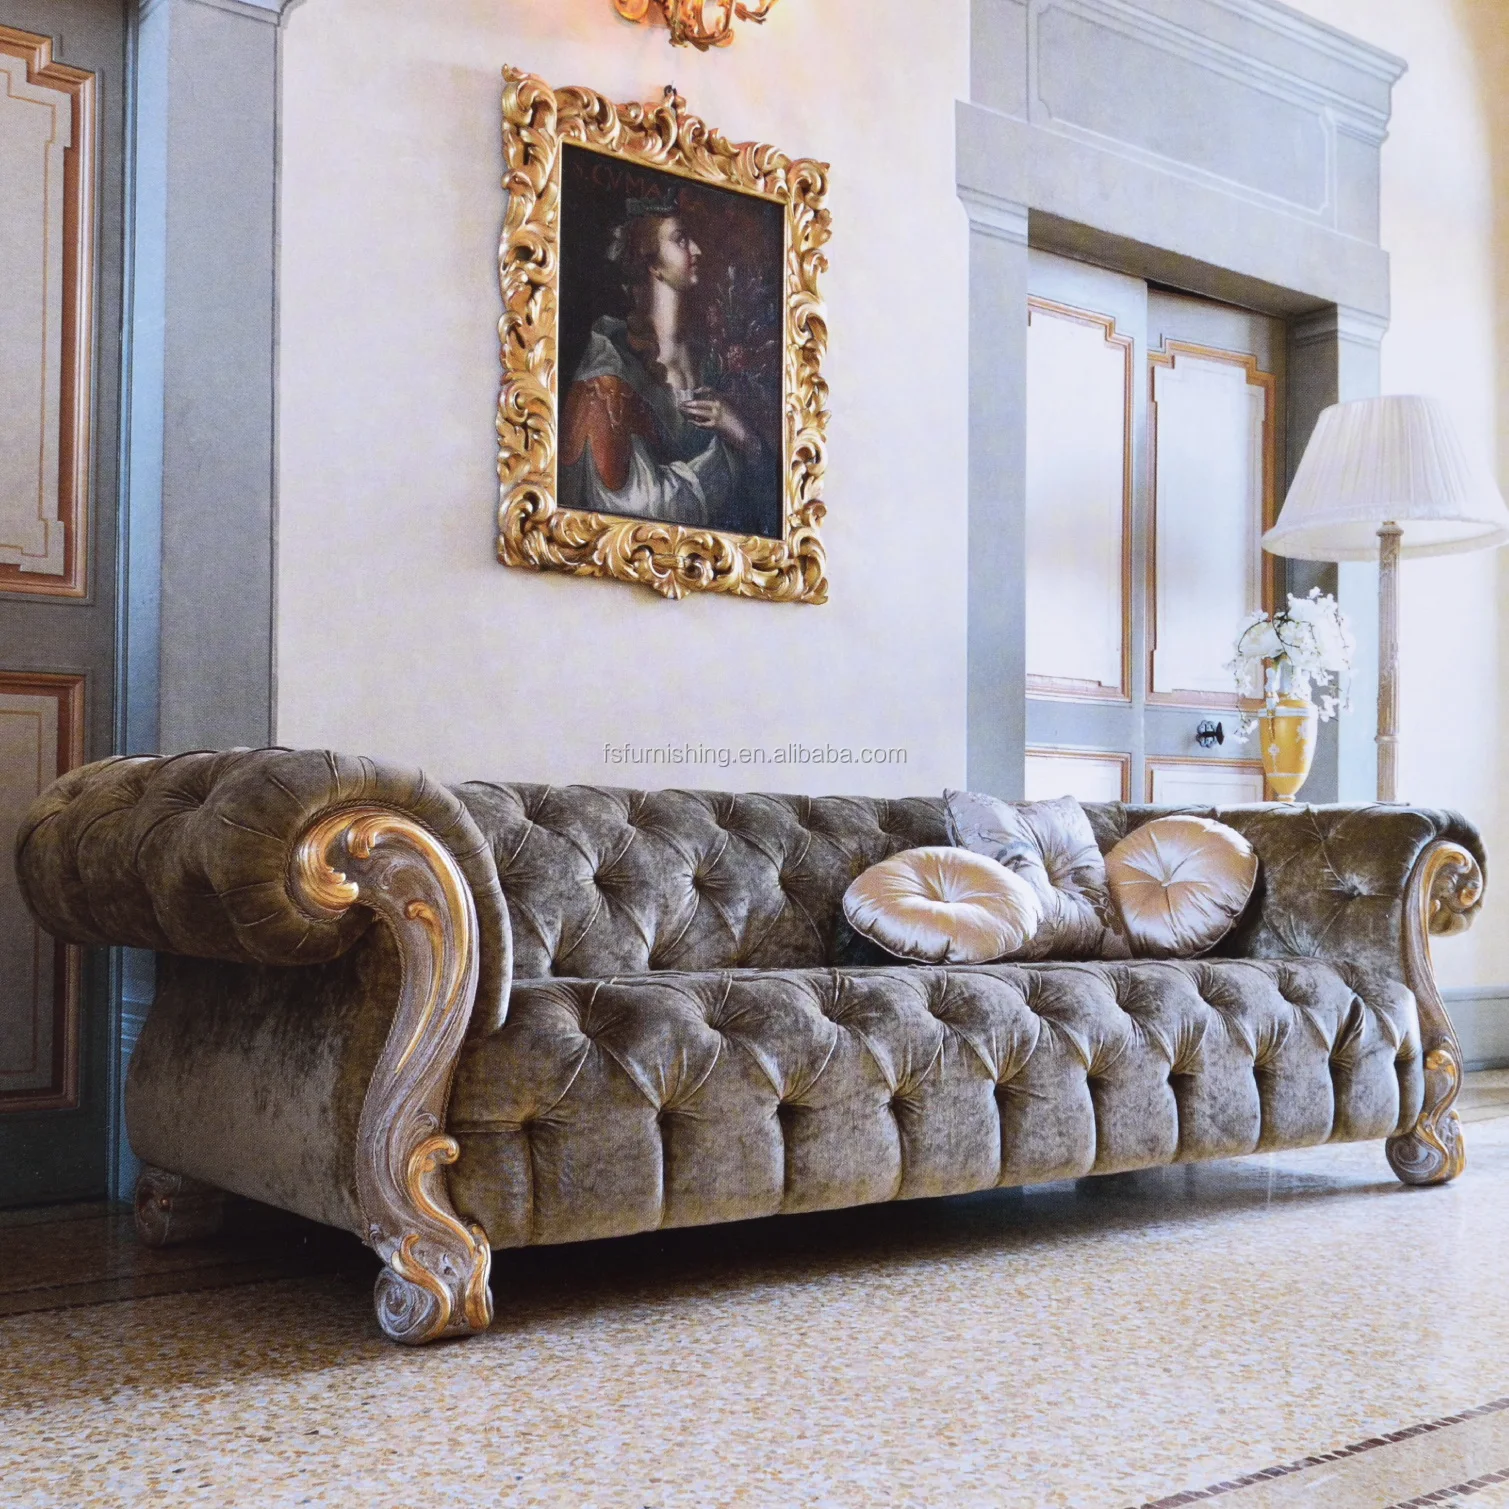 Victorian Luxury Italian Style Living Room Furniture Set Classic Solid Wood Frame With Gold Leaf Fabric Sofa Set Matching Buy Victorian Luxury Italian Living Room Set